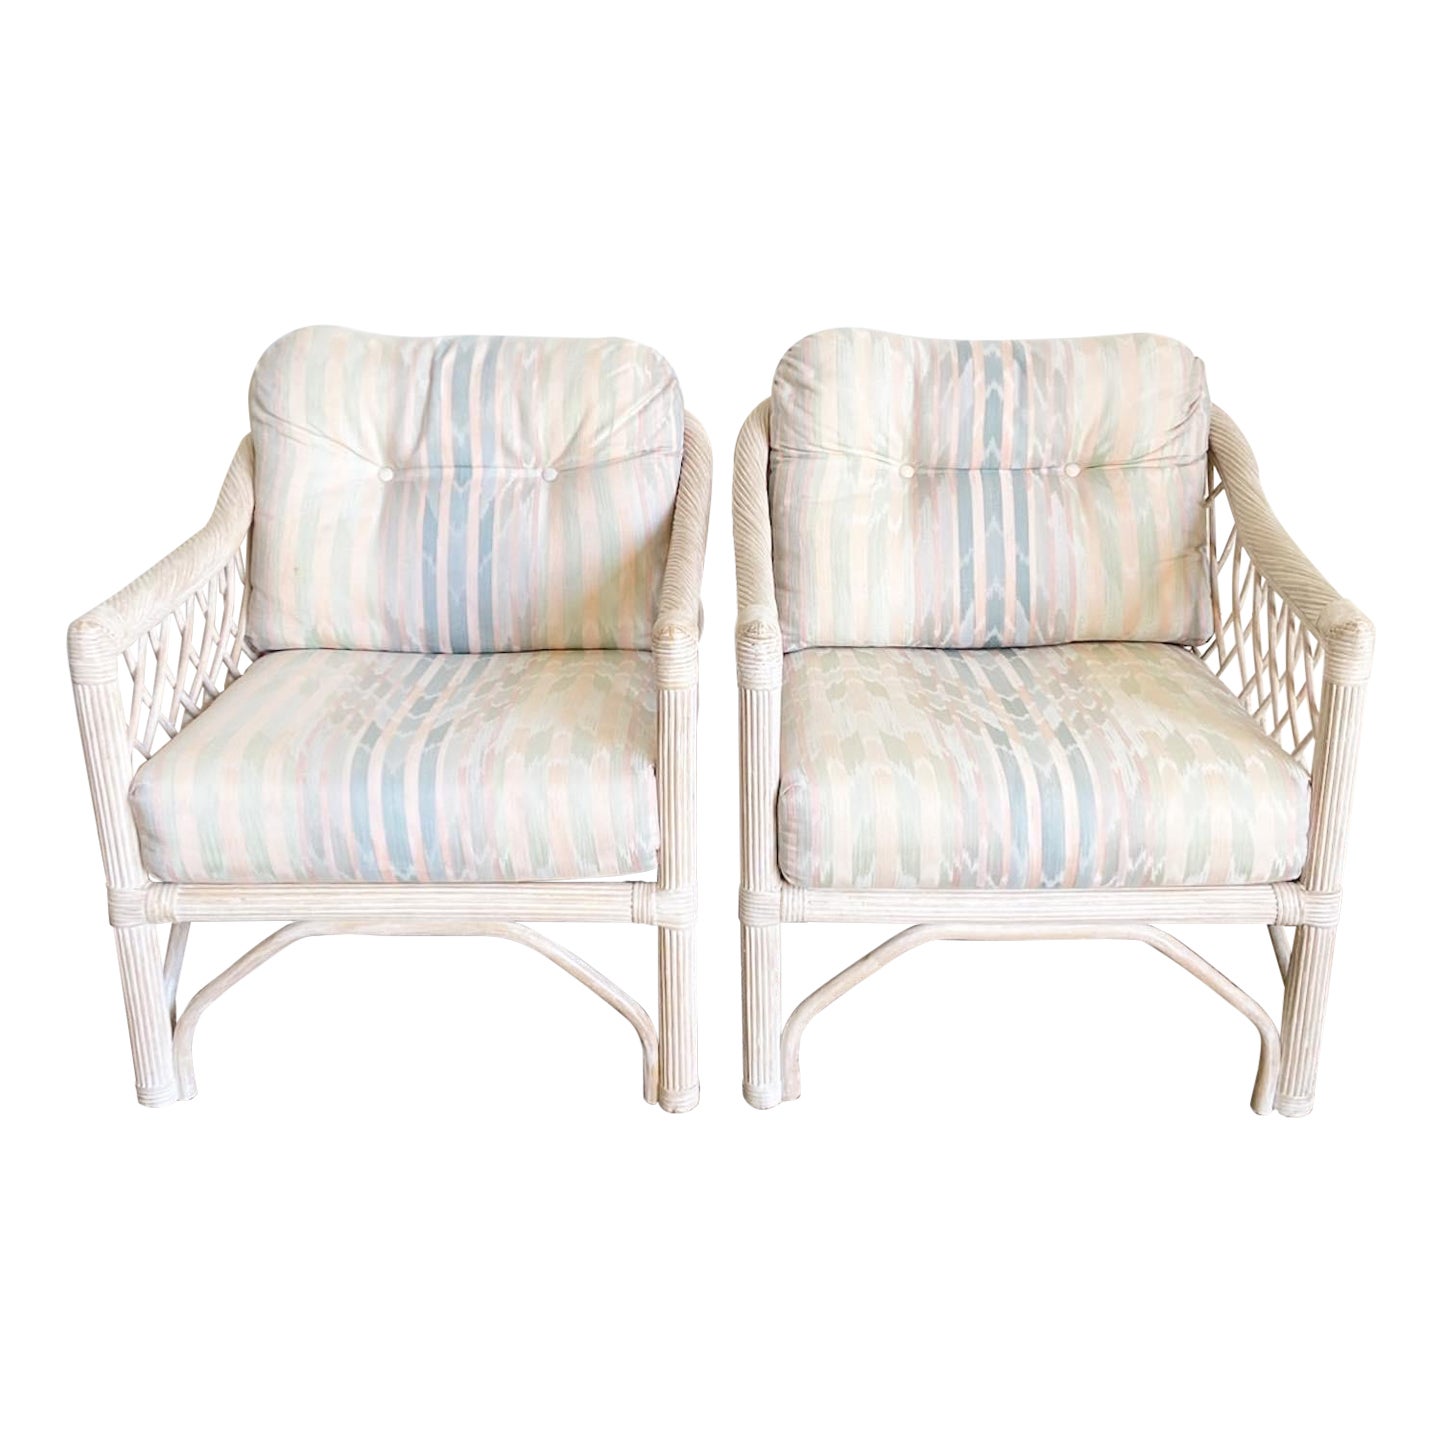 Boho Chic Rattan and Pencil Reed Arm Chairs by Henry Link - a Pair